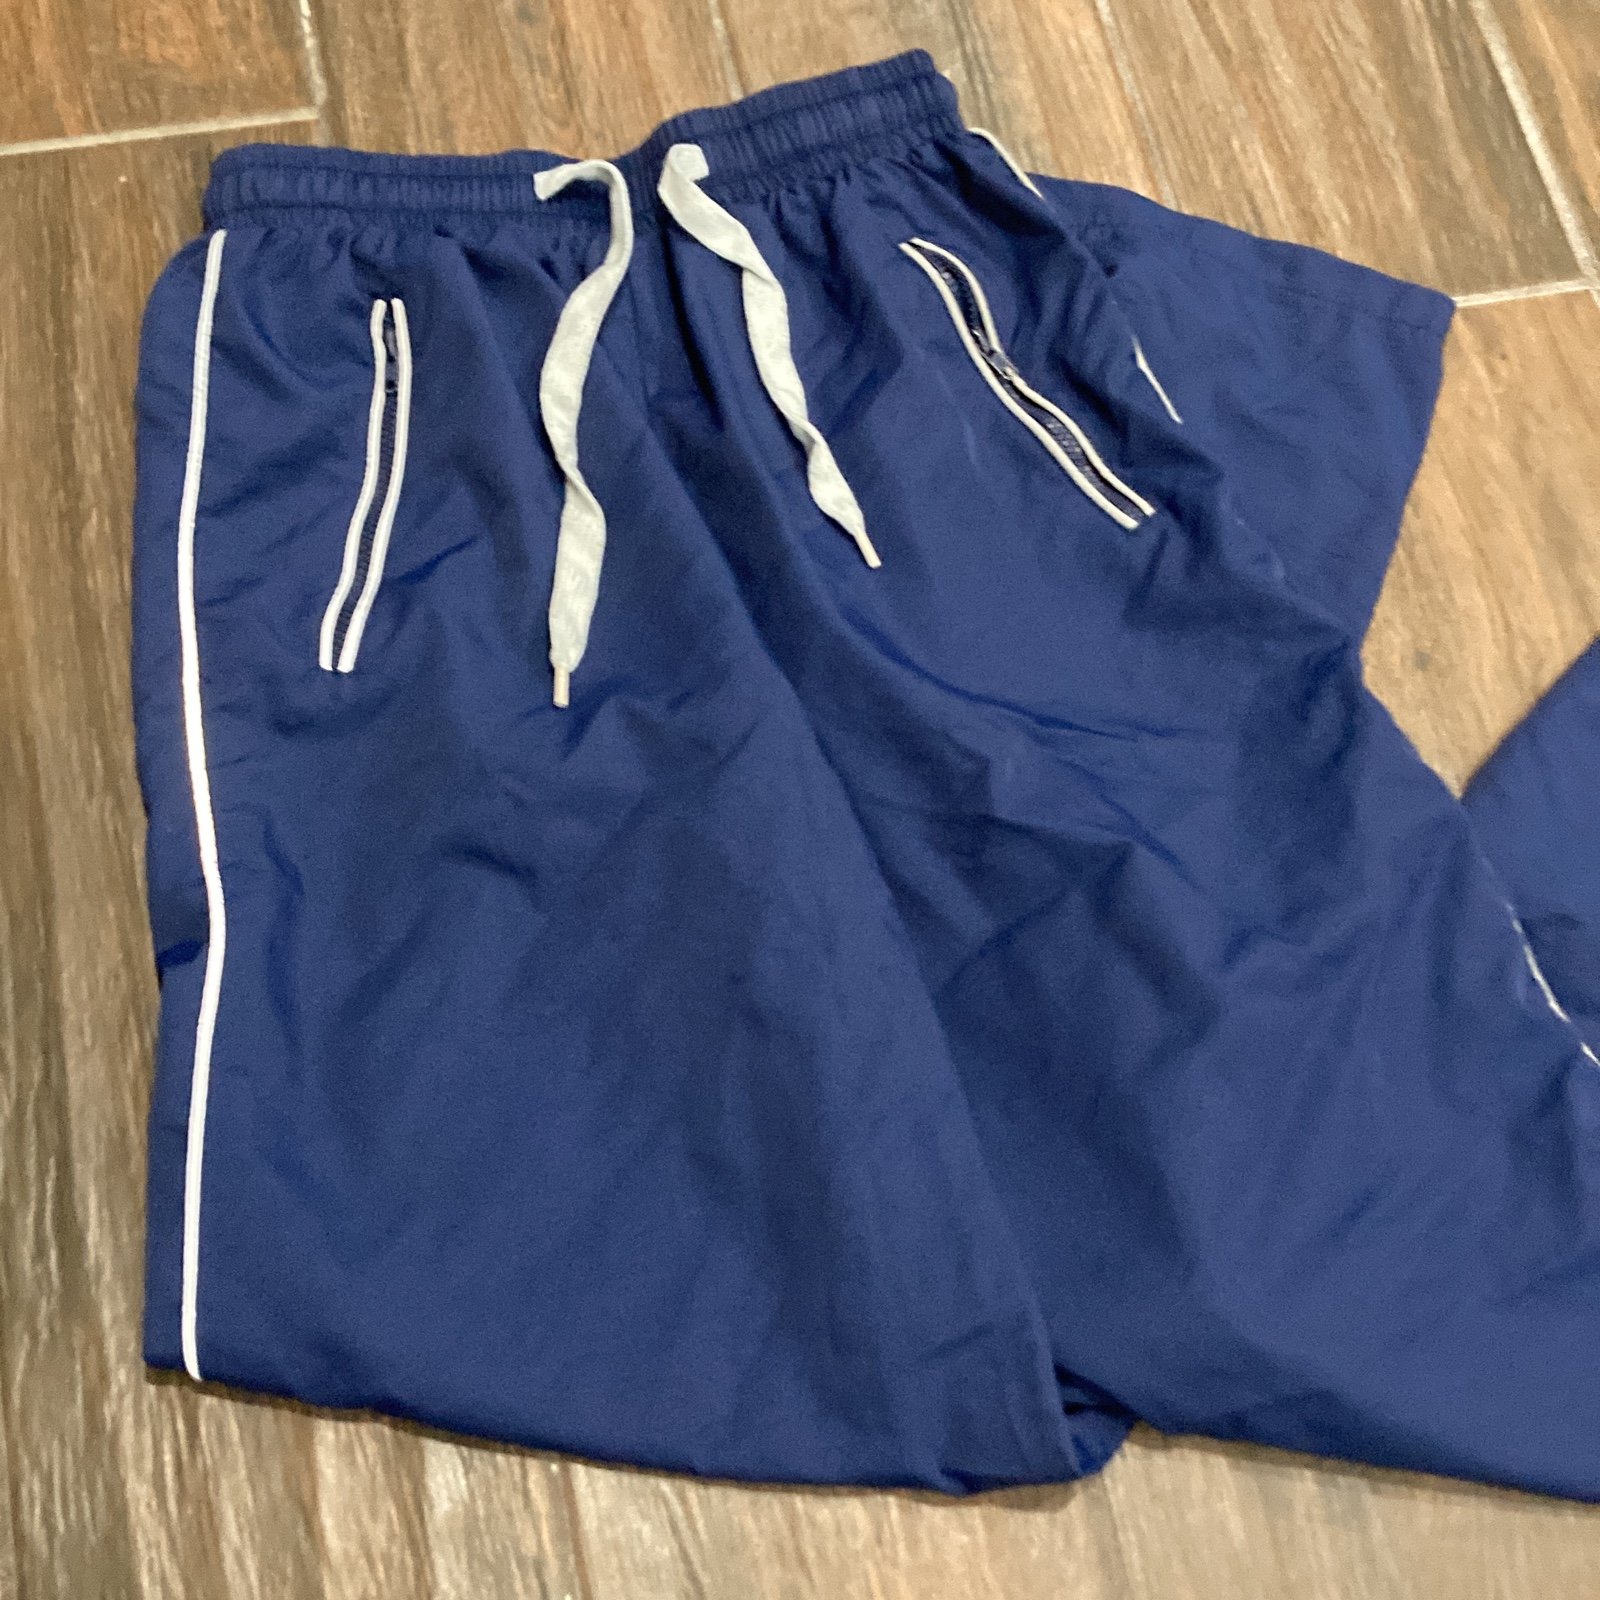 Great Baggy Blue String Pants With Pockets hxAp7f614 all for you